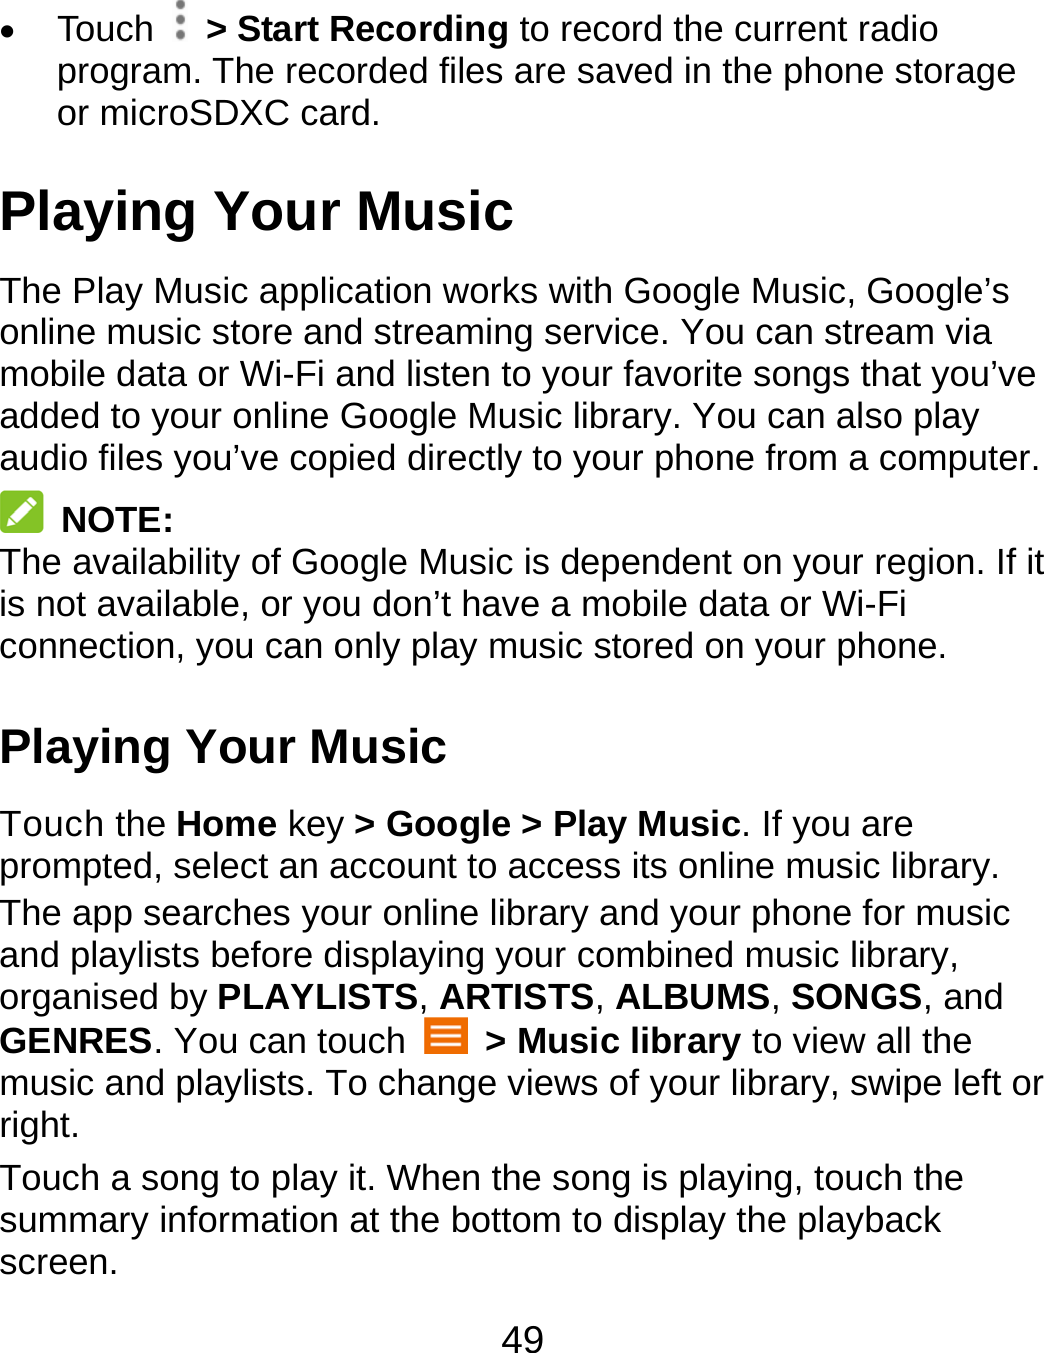 49  Touch   &gt; Start Recording to record the current radio program. The recorded files are saved in the phone storage or microSDXC card. Playing Your Music The Play Music application works with Google Music, Google’s online music store and streaming service. You can stream via mobile data or Wi-Fi and listen to your favorite songs that you’ve added to your online Google Music library. You can also play audio files you’ve copied directly to your phone from a computer.  NOTE: The availability of Google Music is dependent on your region. If it is not available, or you don’t have a mobile data or Wi-Fi connection, you can only play music stored on your phone. Playing Your Music Touch the Home key &gt; Google &gt; Play Music. If you are prompted, select an account to access its online music library. The app searches your online library and your phone for music and playlists before displaying your combined music library, organised by PLAYLISTS, ARTISTS, ALBUMS, SONGS, and GENRES. You can touch   &gt; Music library to view all the music and playlists. To change views of your library, swipe left or right. Touch a song to play it. When the song is playing, touch the summary information at the bottom to display the playback screen. 